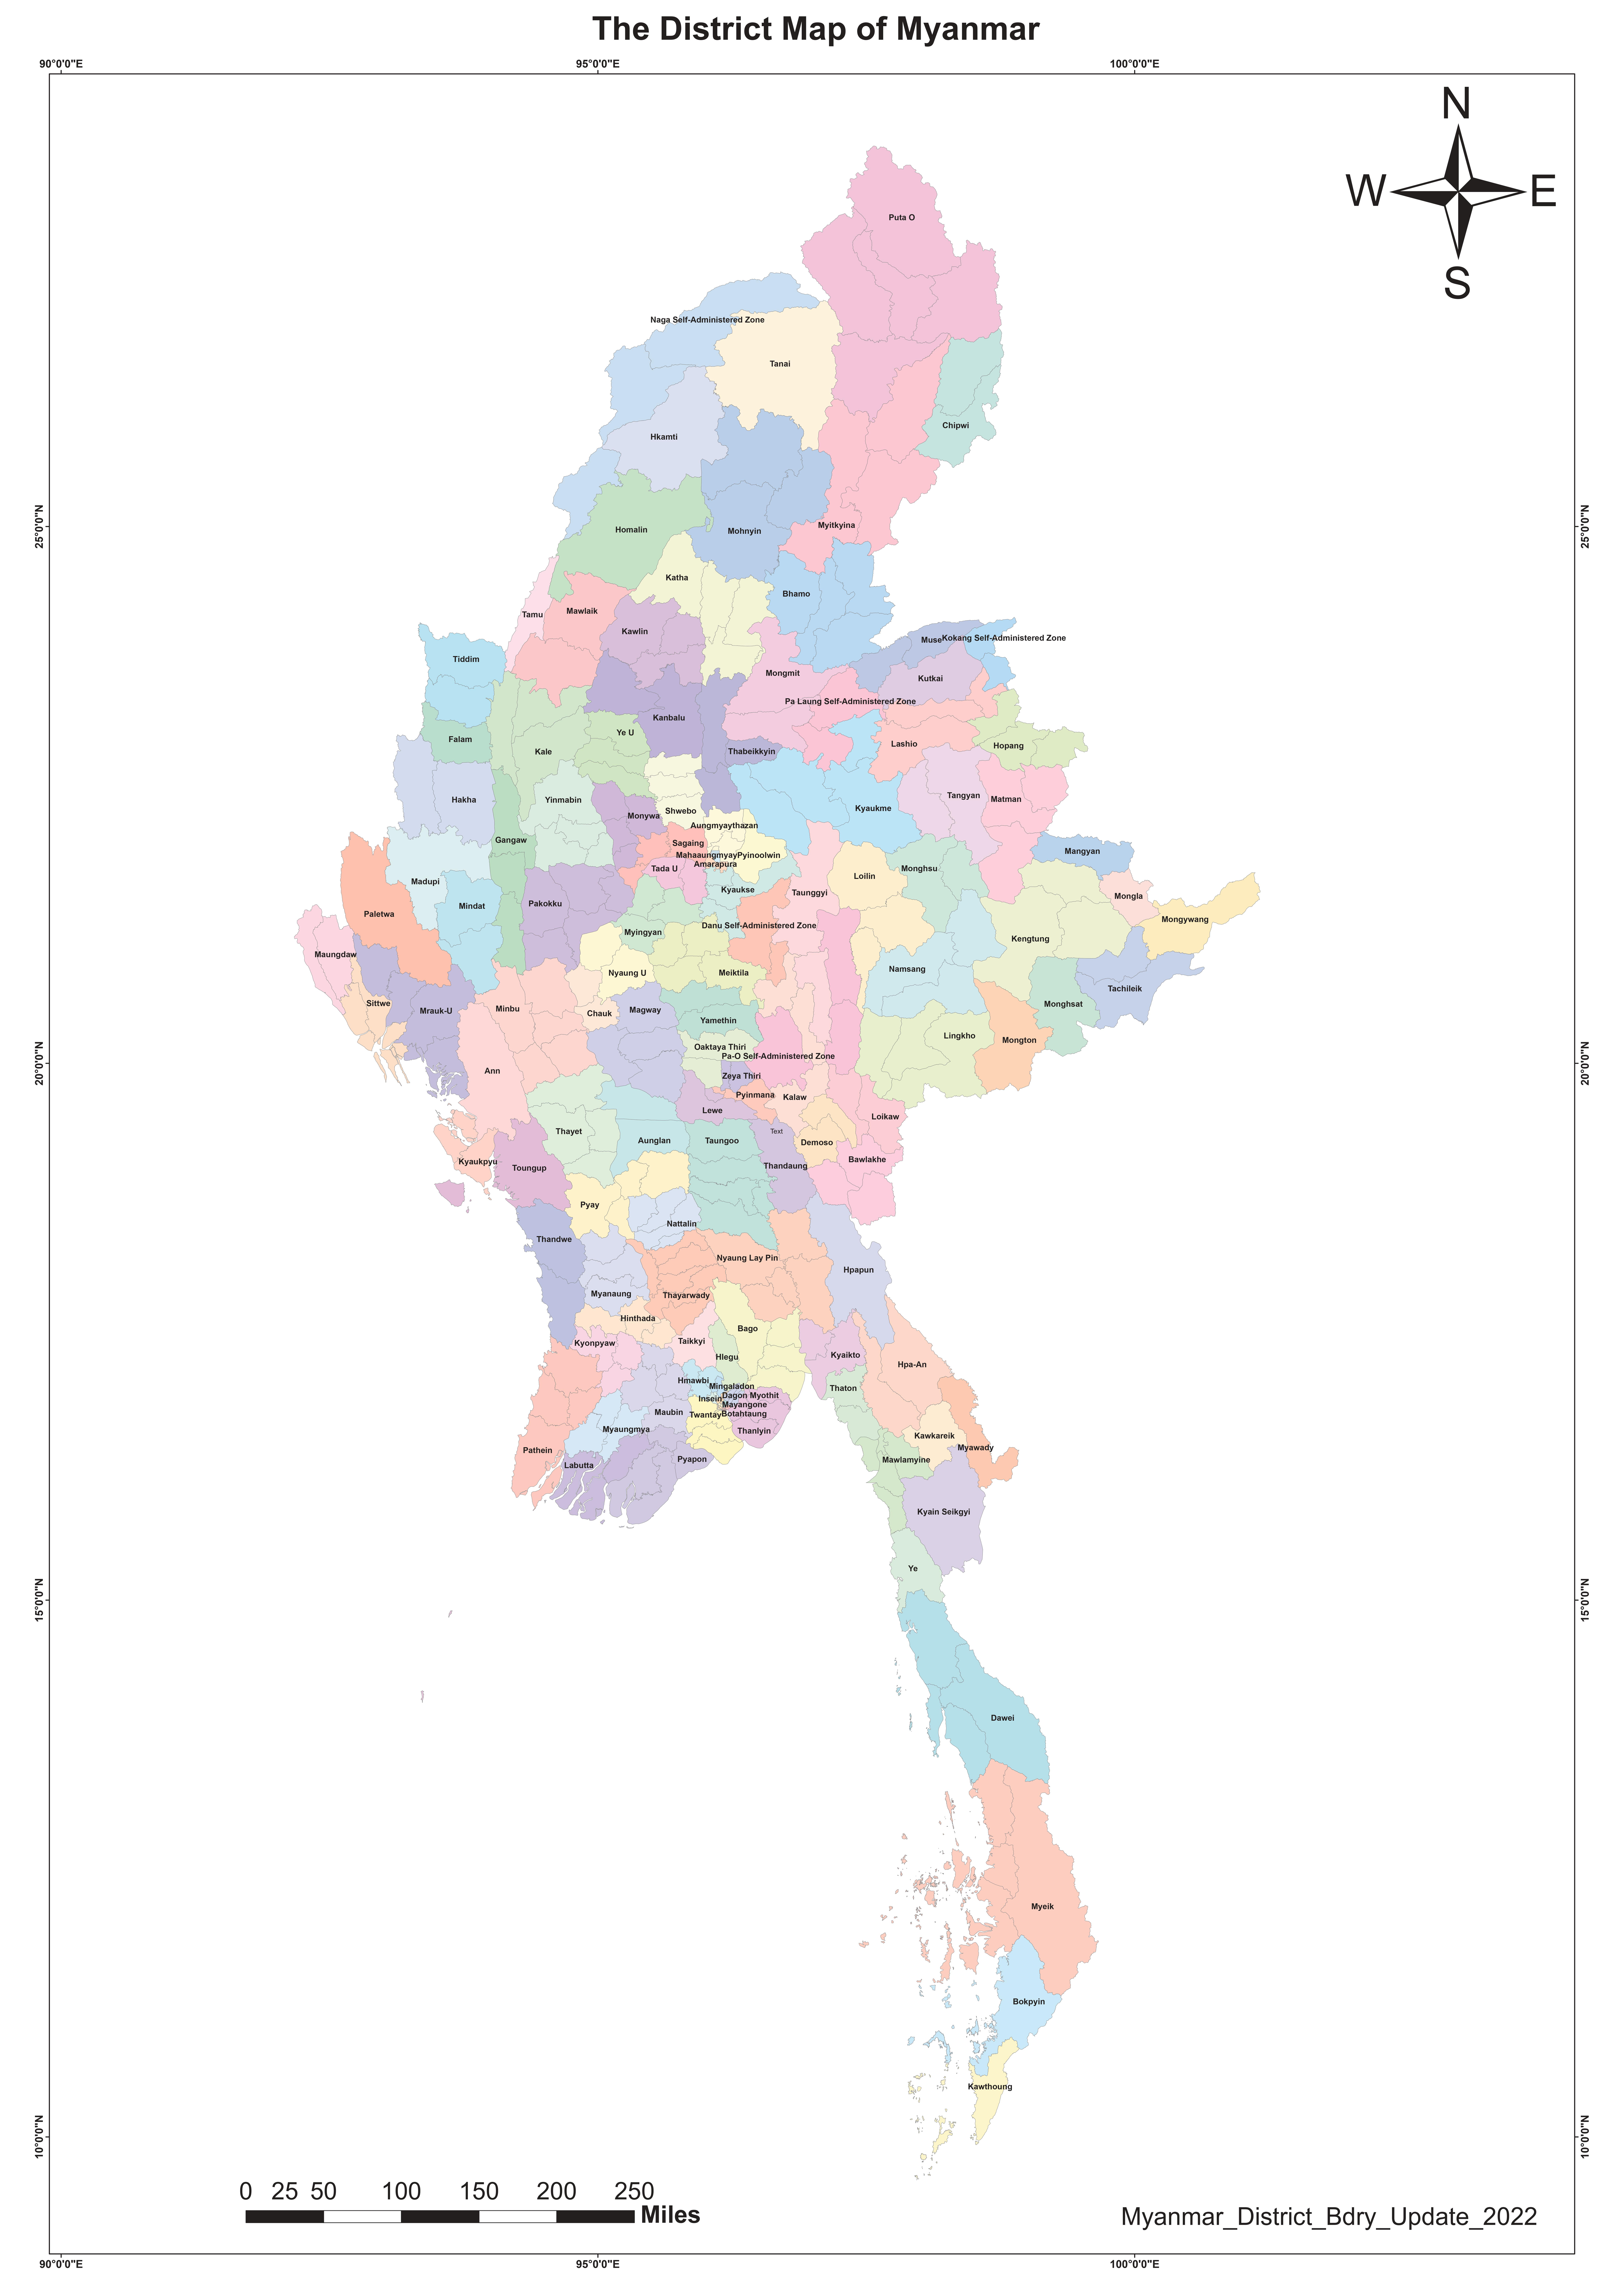 The District Map of Myanmar